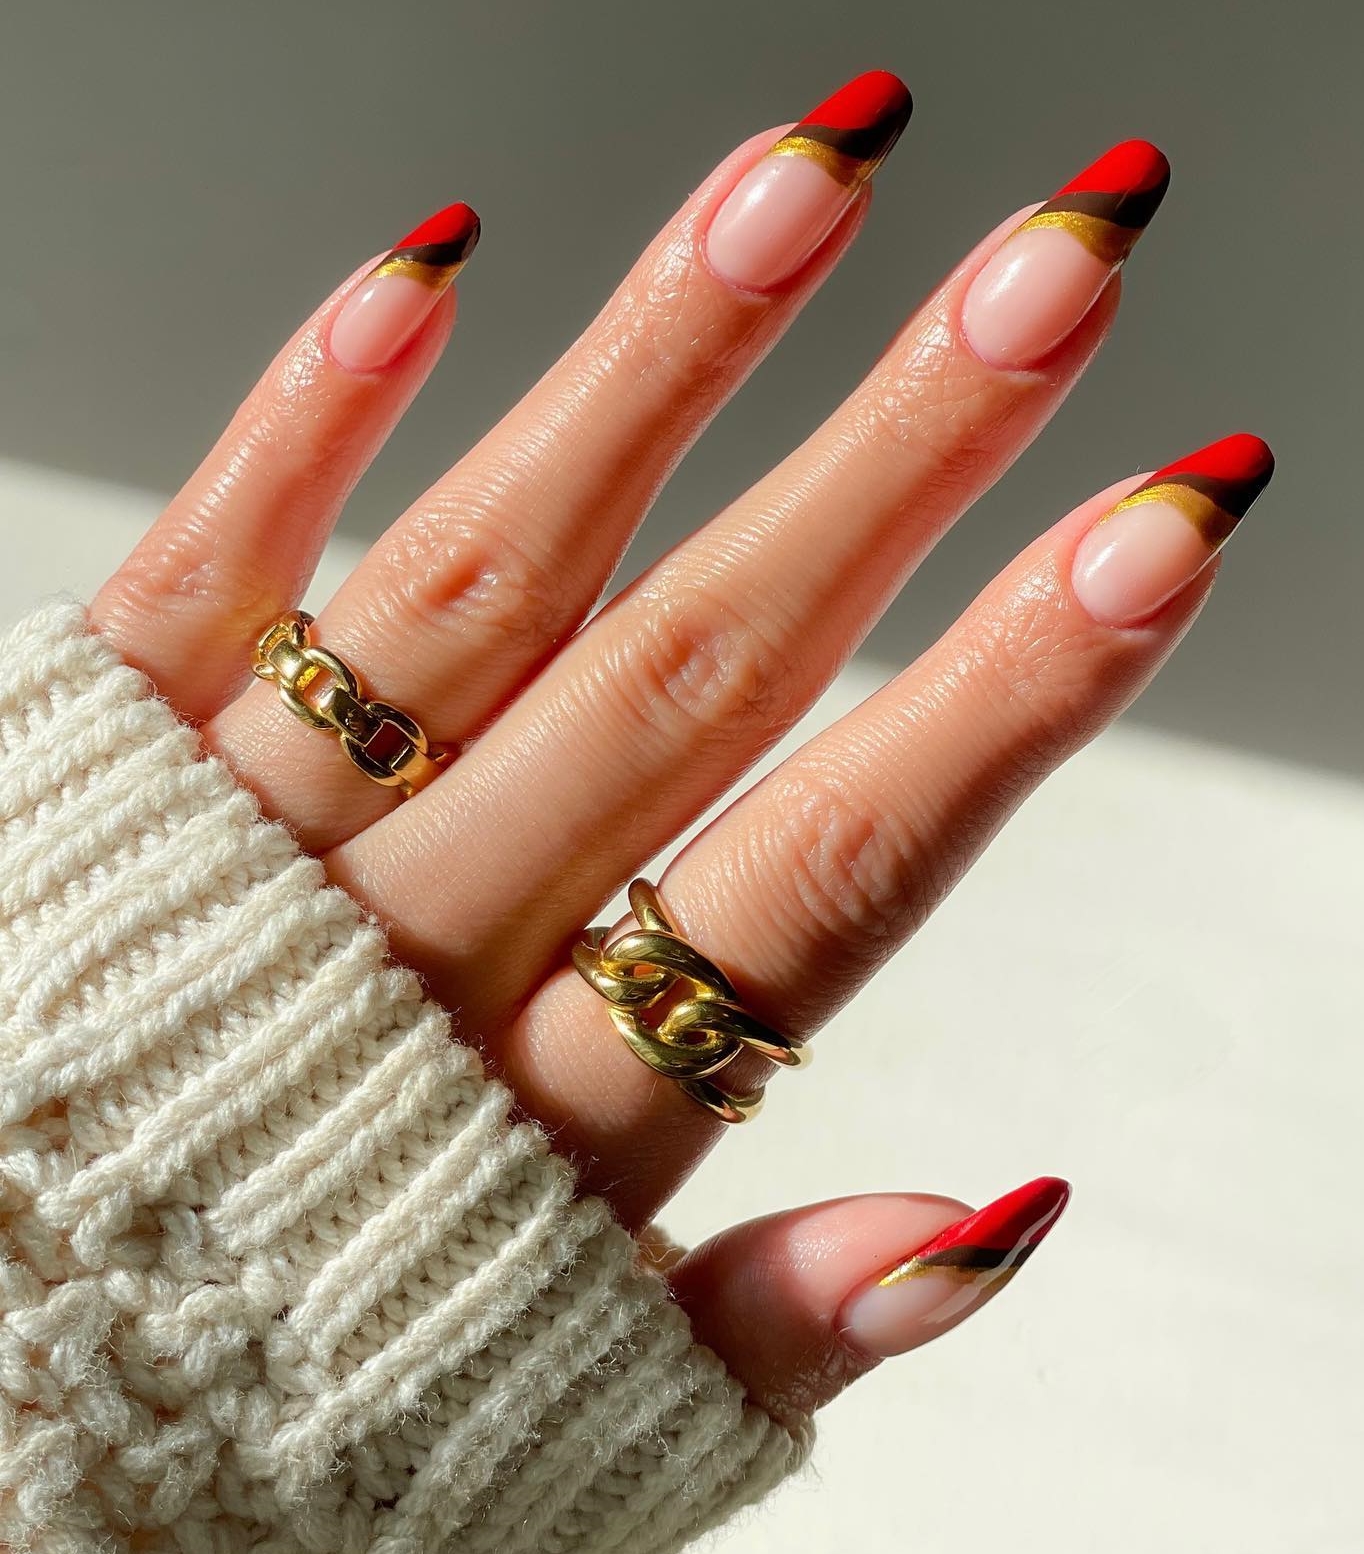 Long Round Red and Black French Nail Tips